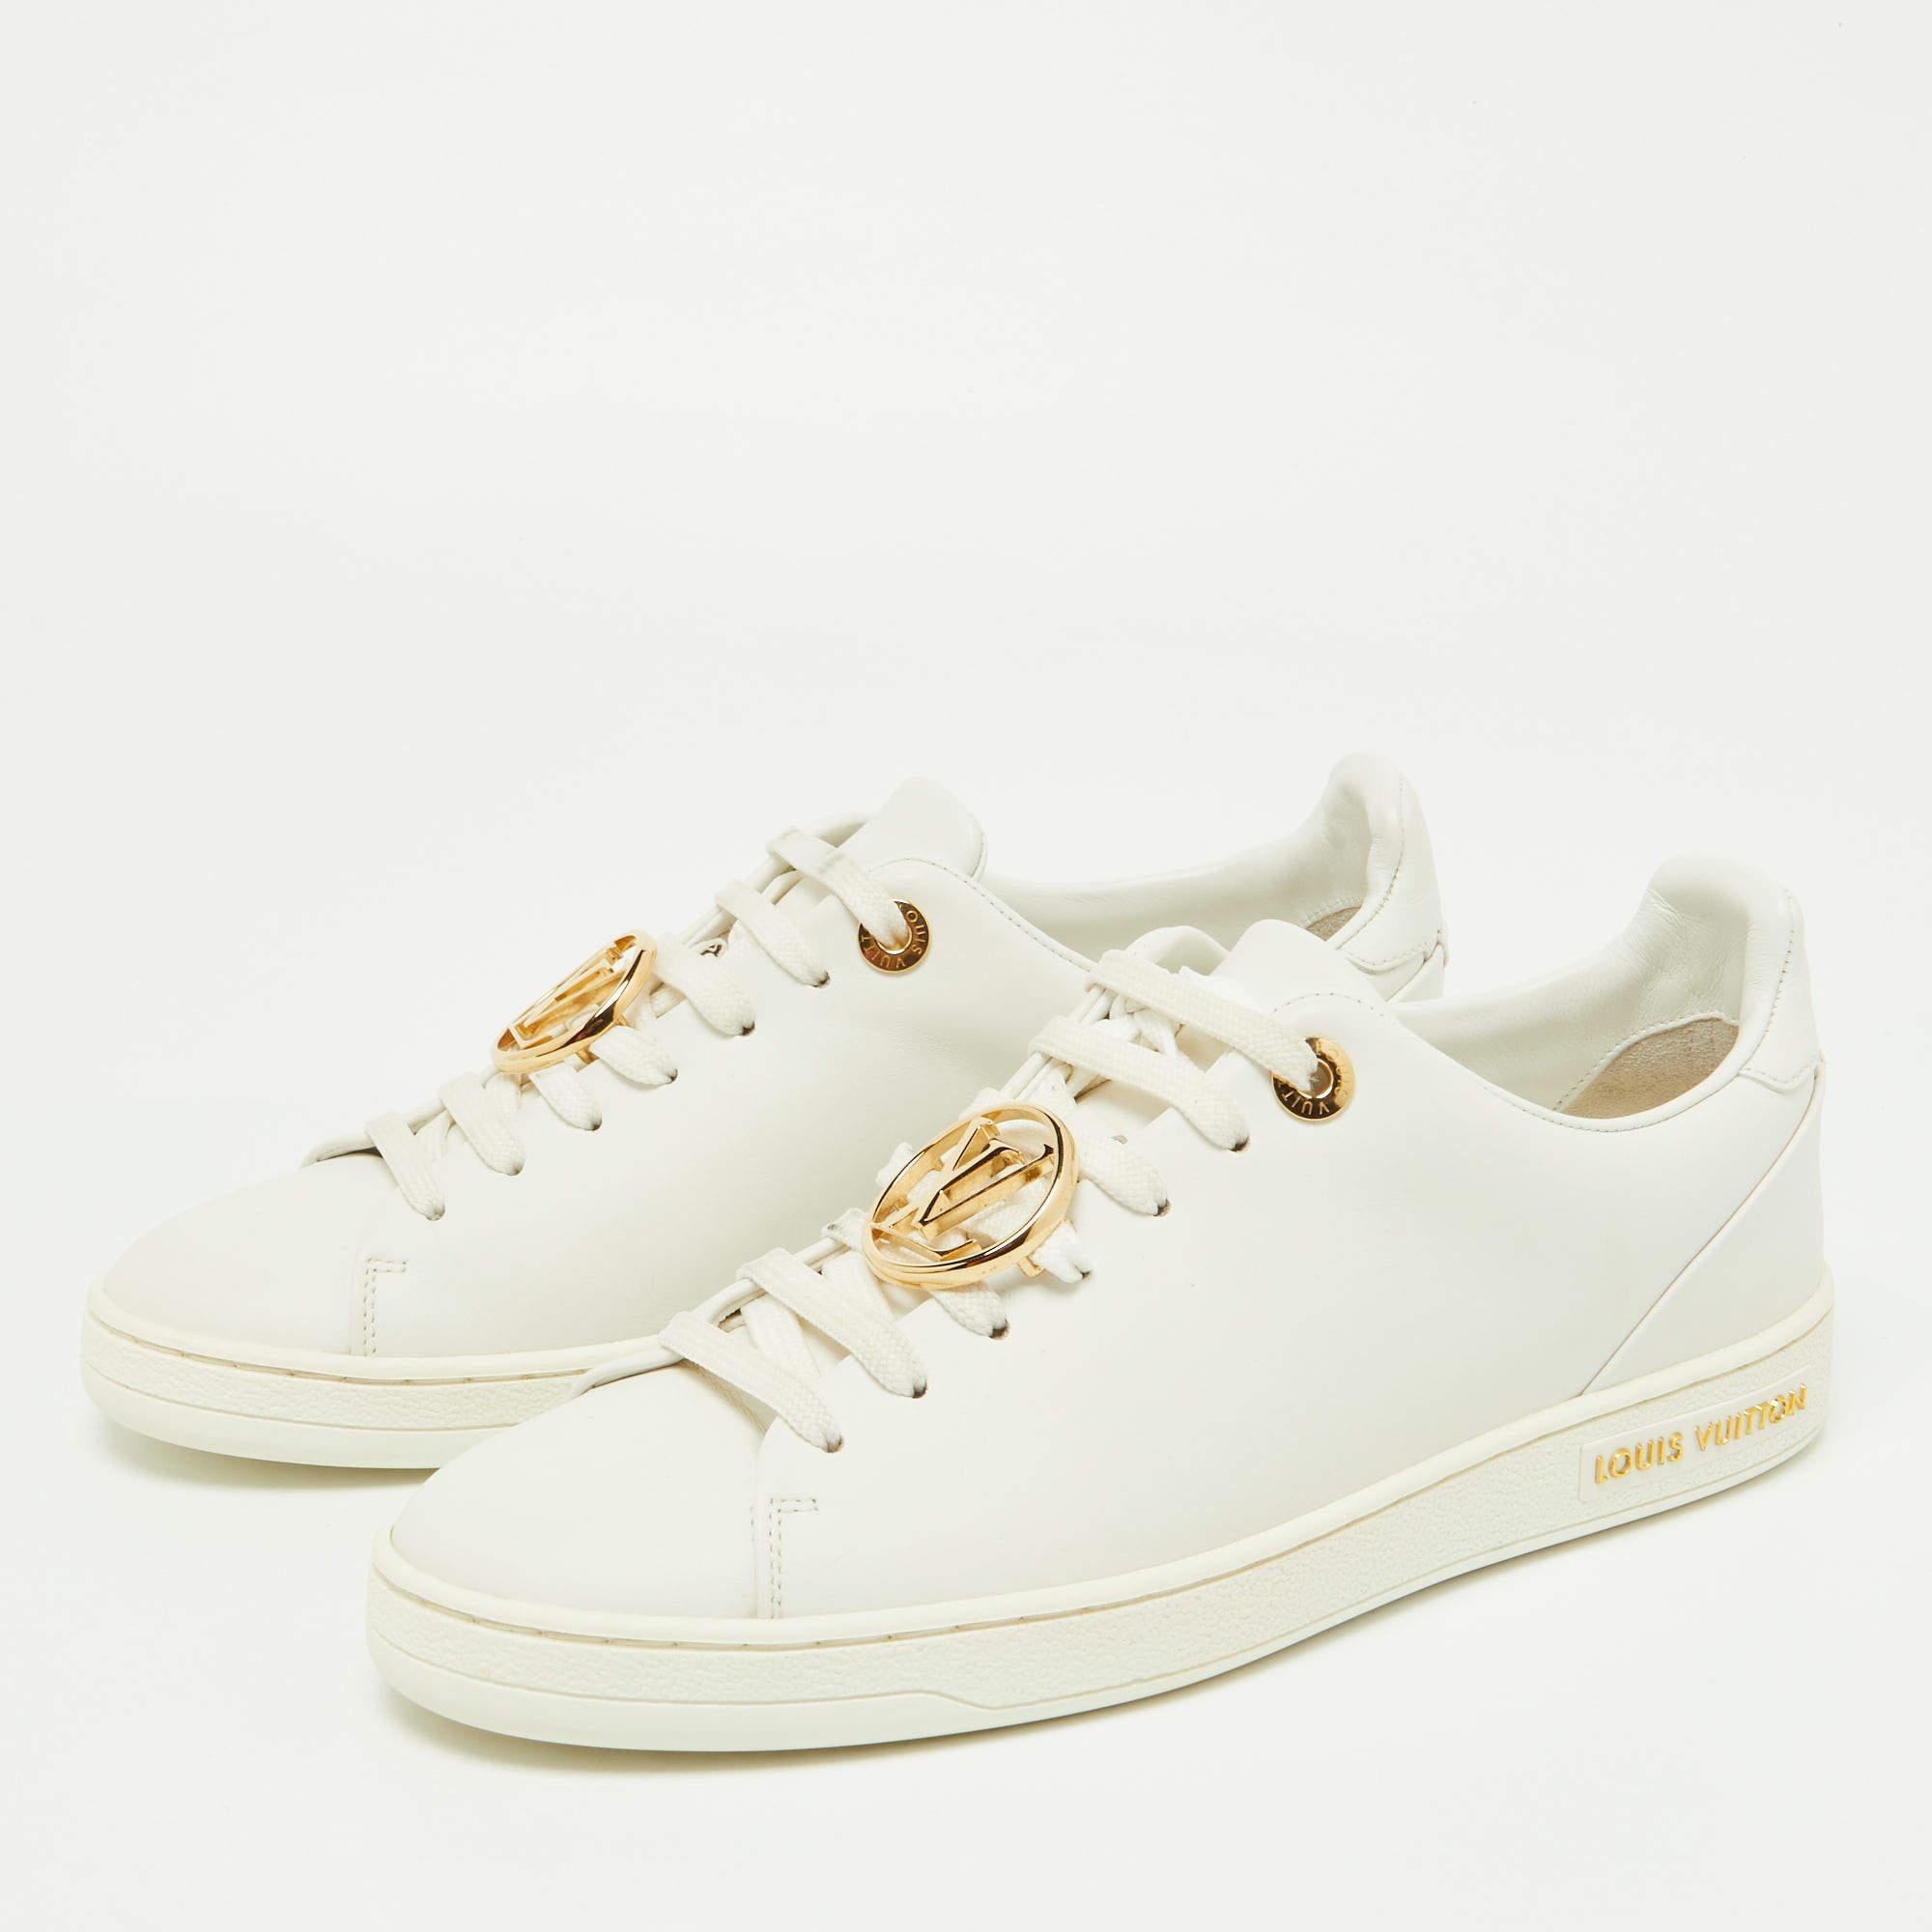 Coming in a classic silhouette, these LV white sneakers are a seamless combination of luxury, comfort, and style. These sneakers are designed with signature details and comfortable insoles.

